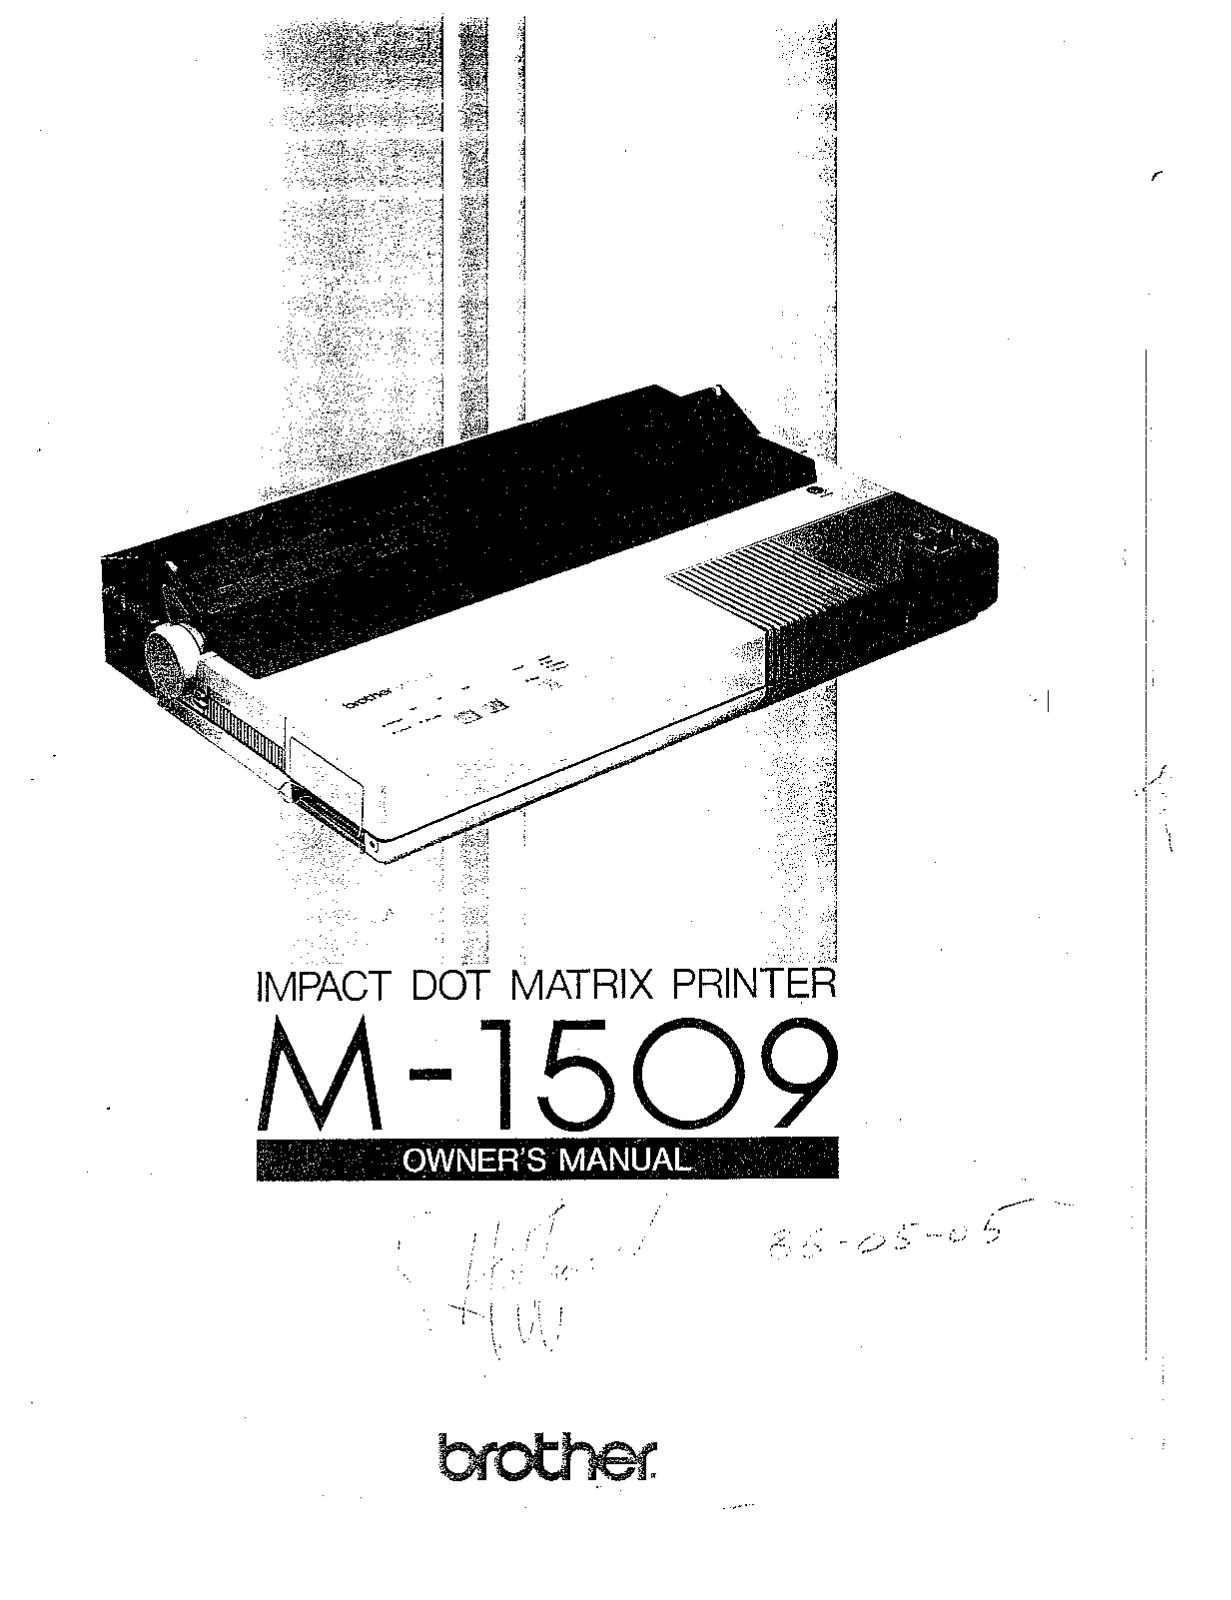 Brother M-1509 Owner's Manual